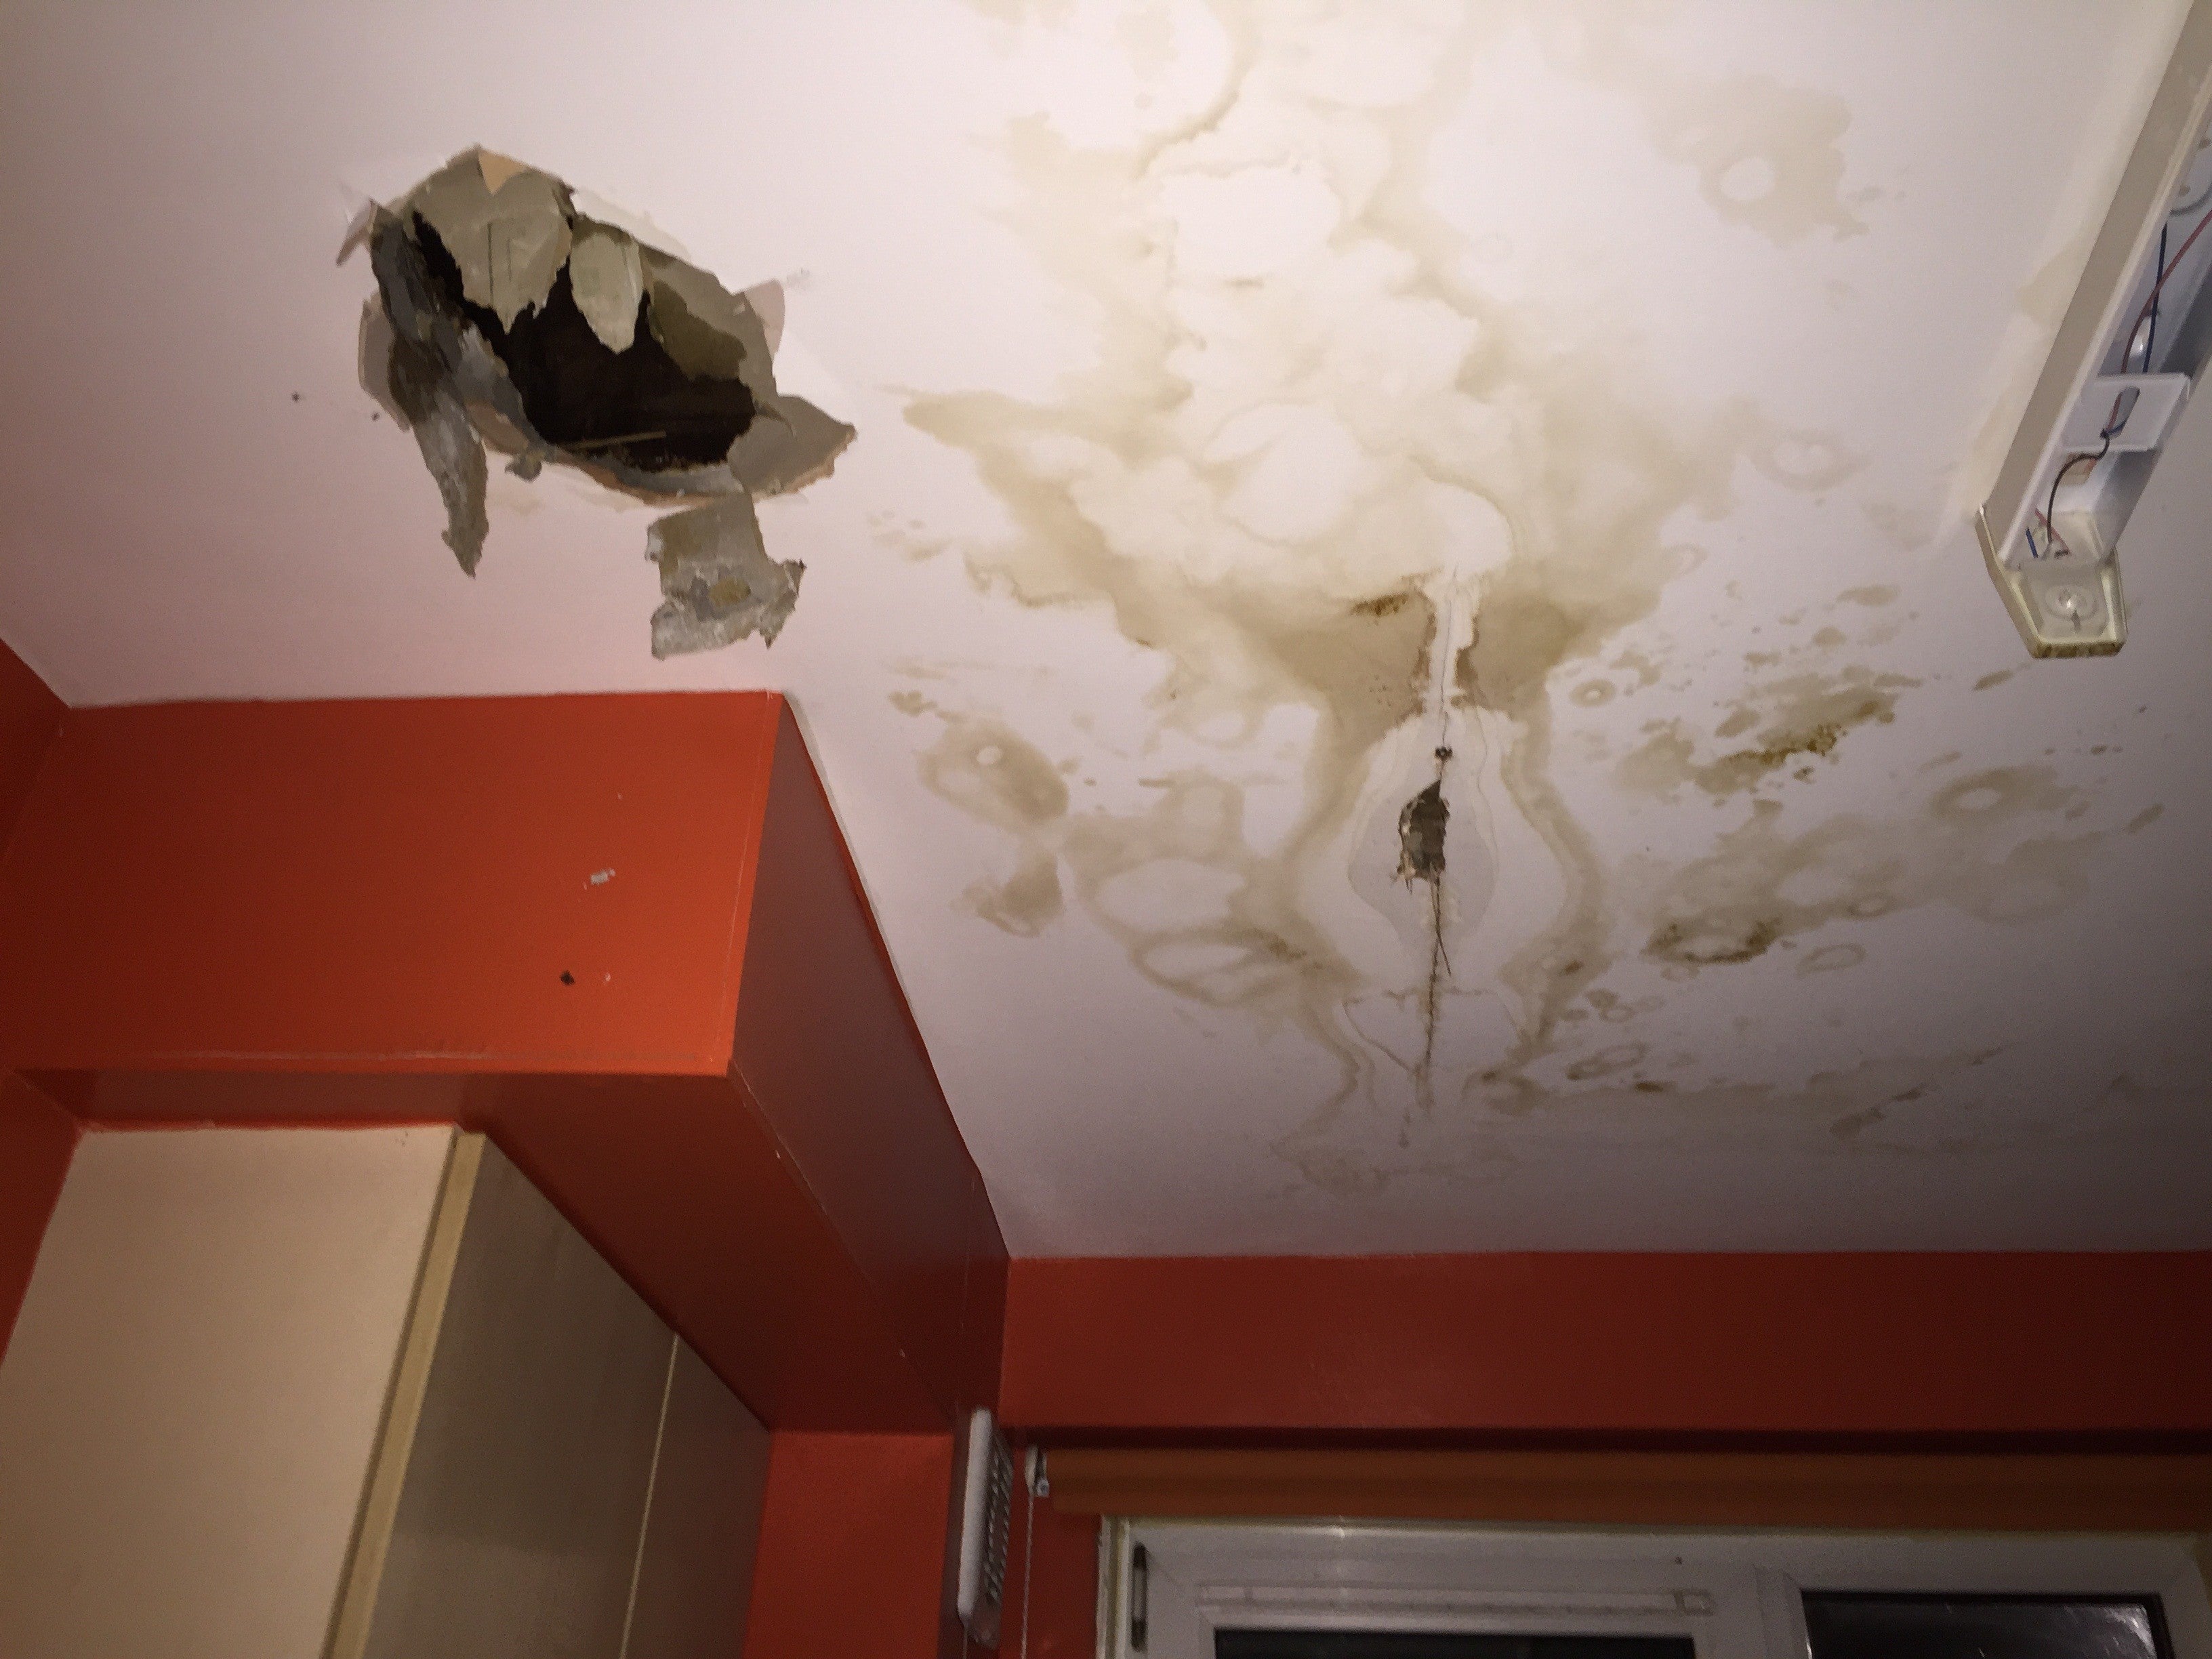 A leak caused severe damage to the ceiling in 2016